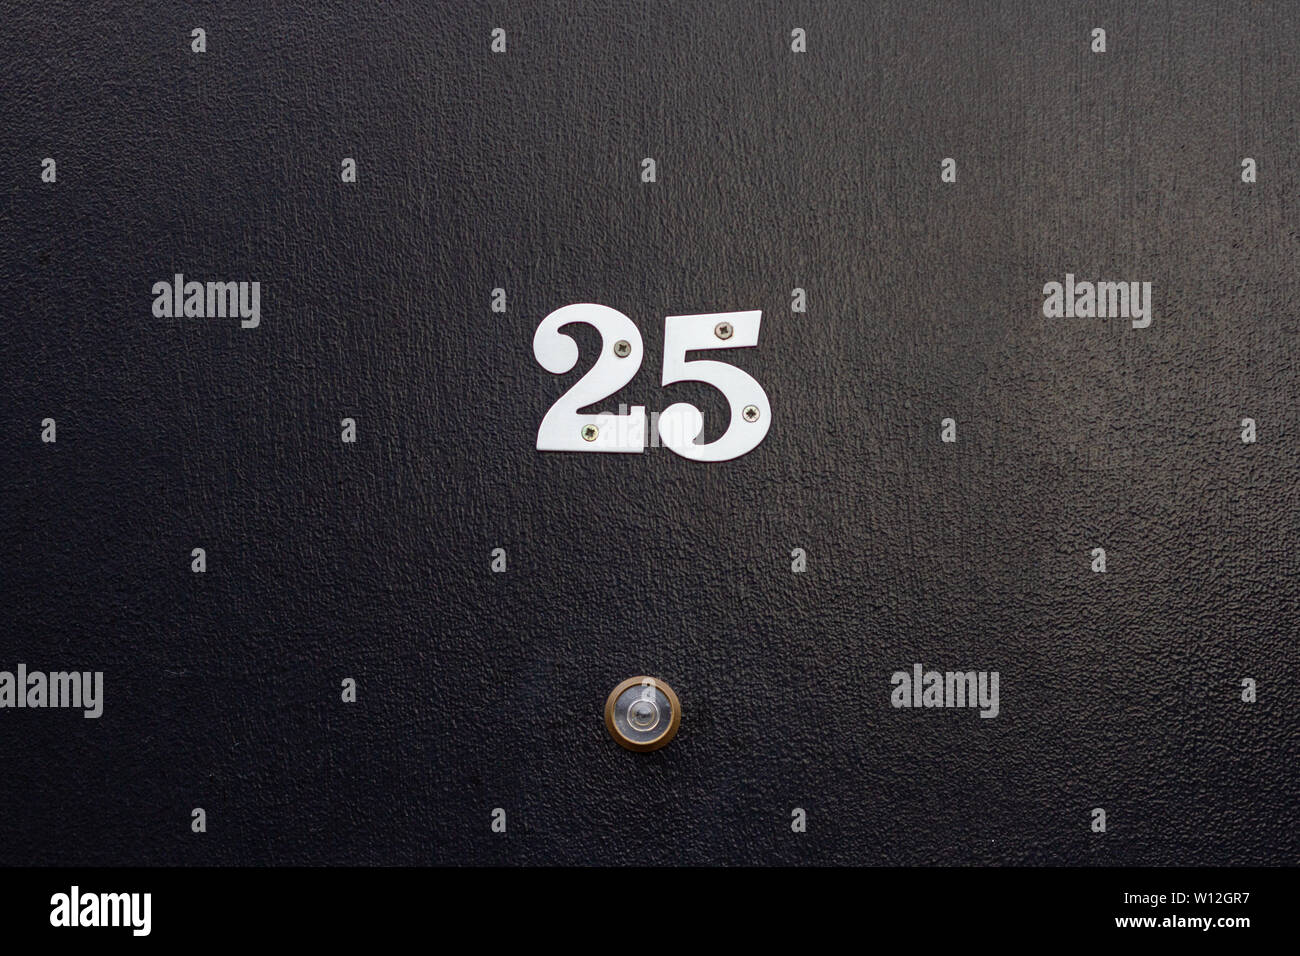 House number 25 with the twenty-five in silver digits on a black wooden front door with peephole Stock Photo